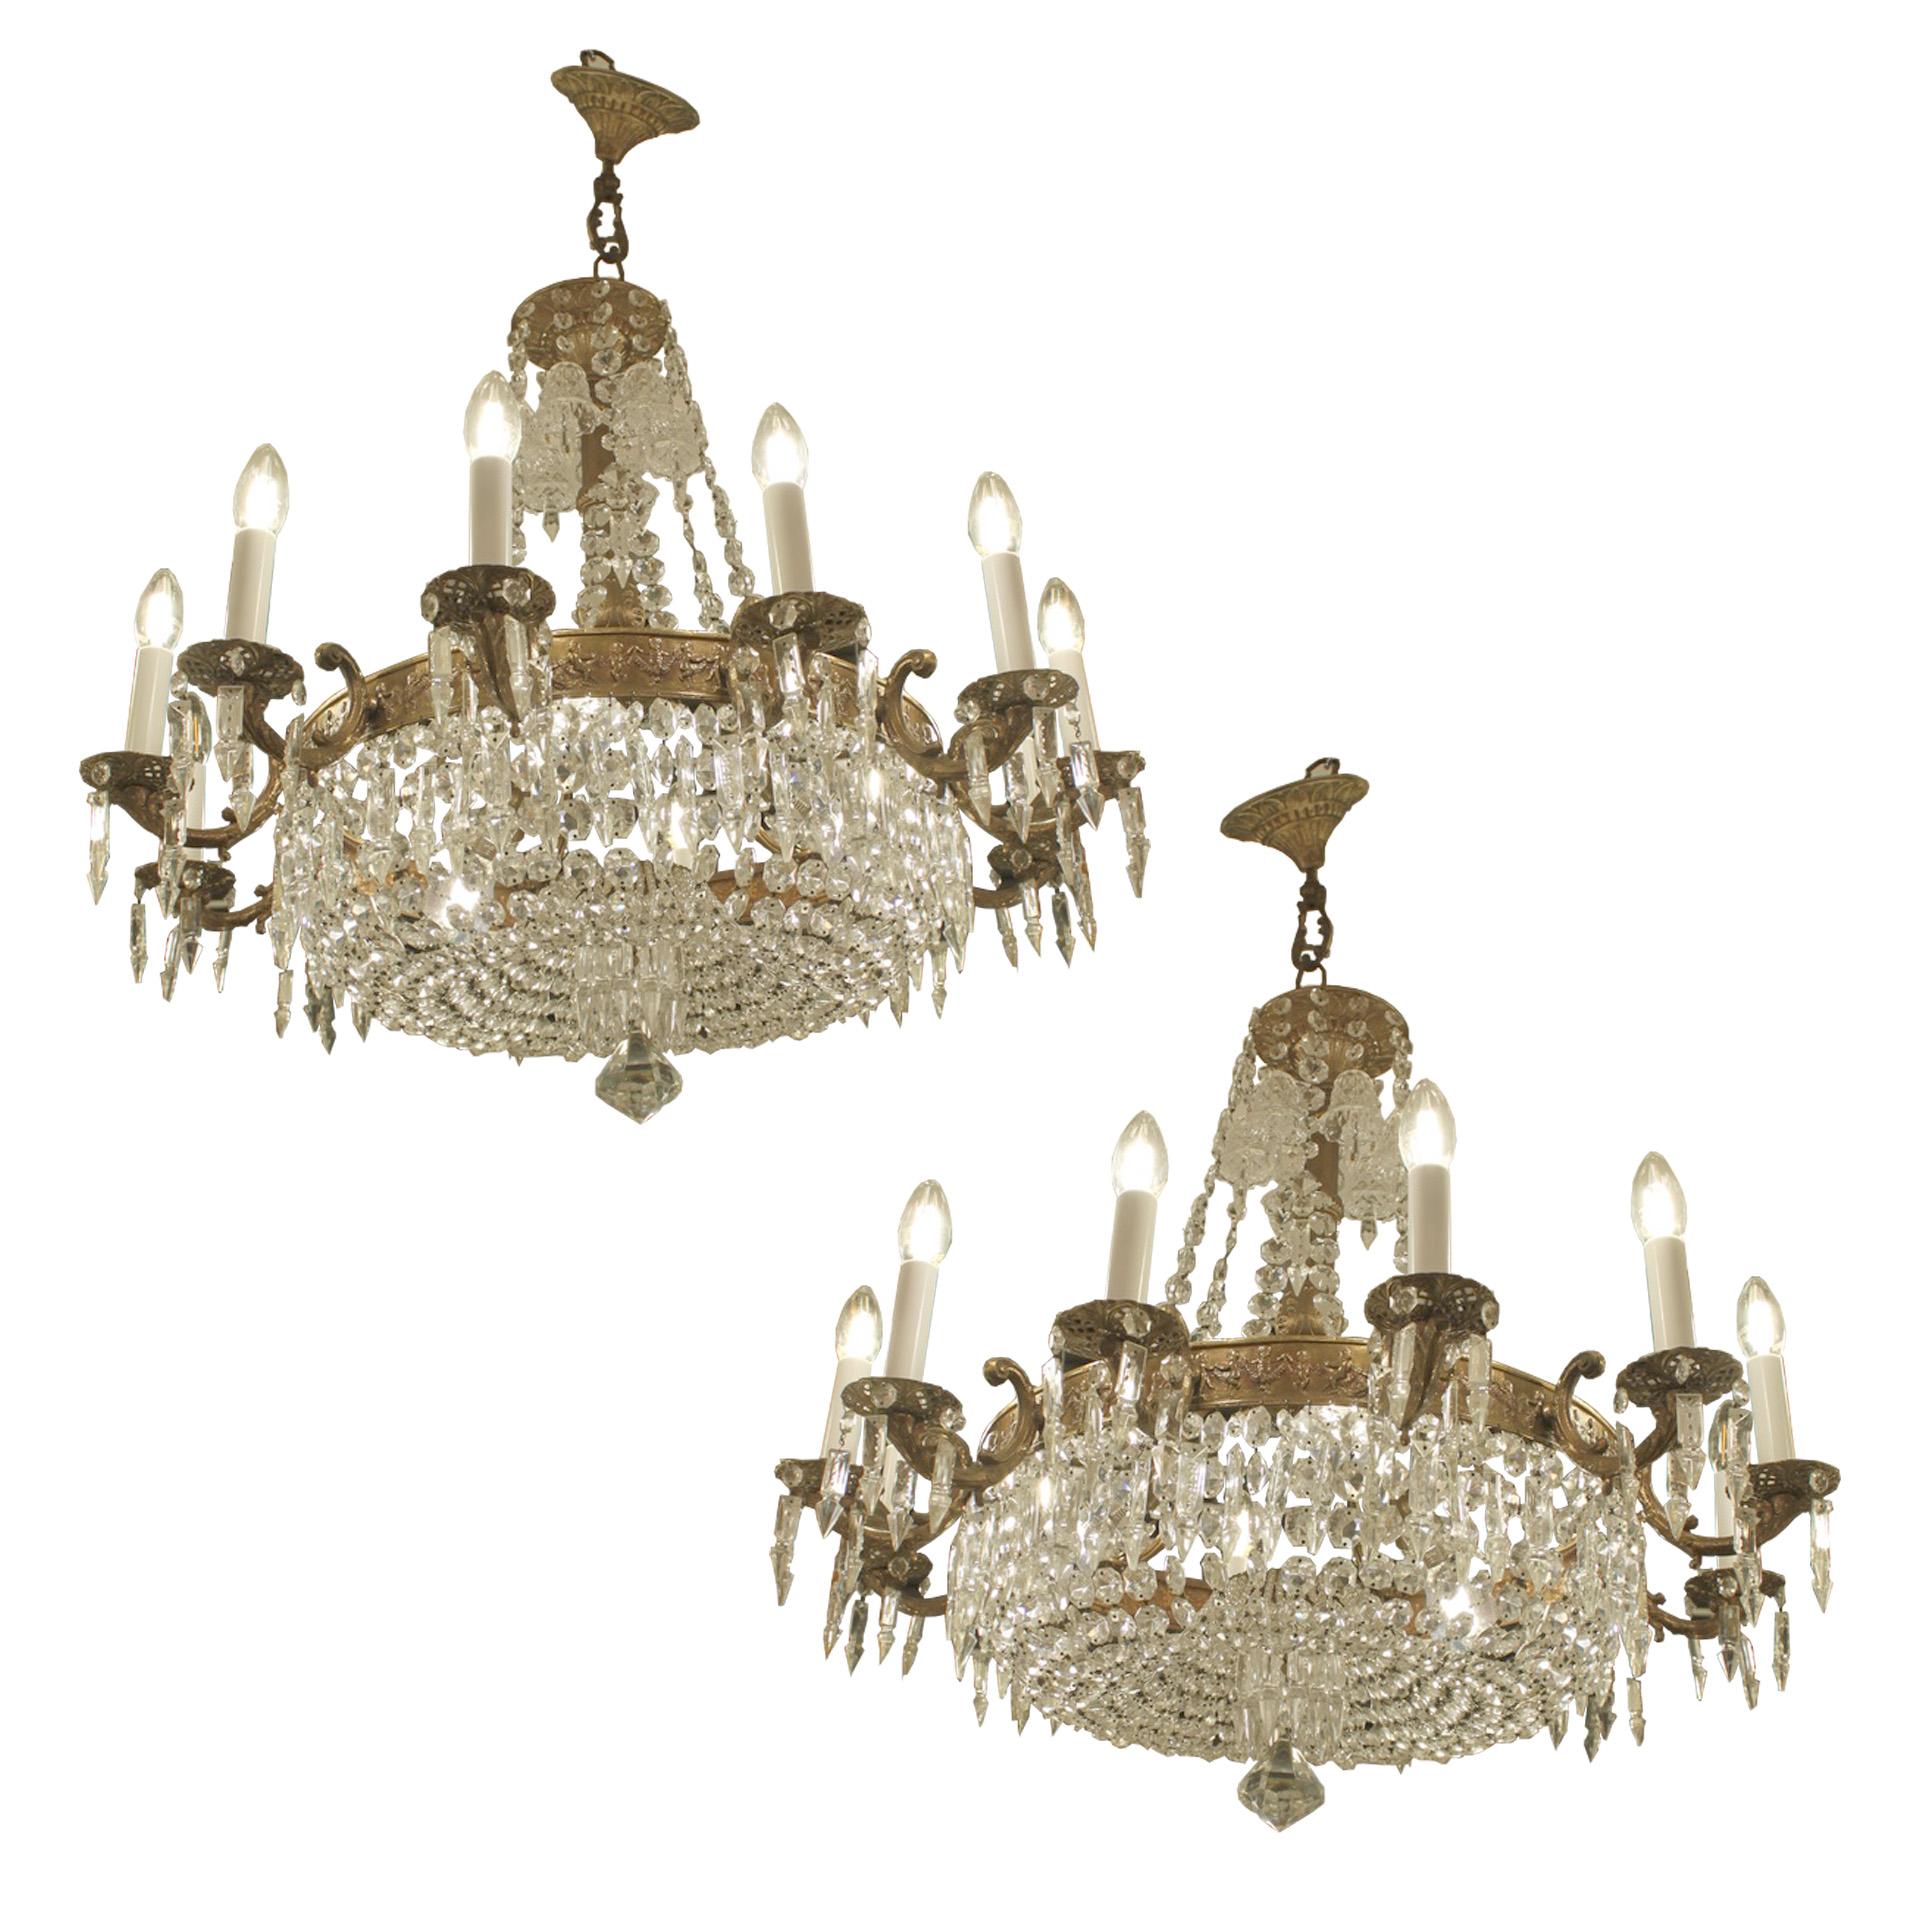 French Pair of Crystal Chandeliers 1880 circa